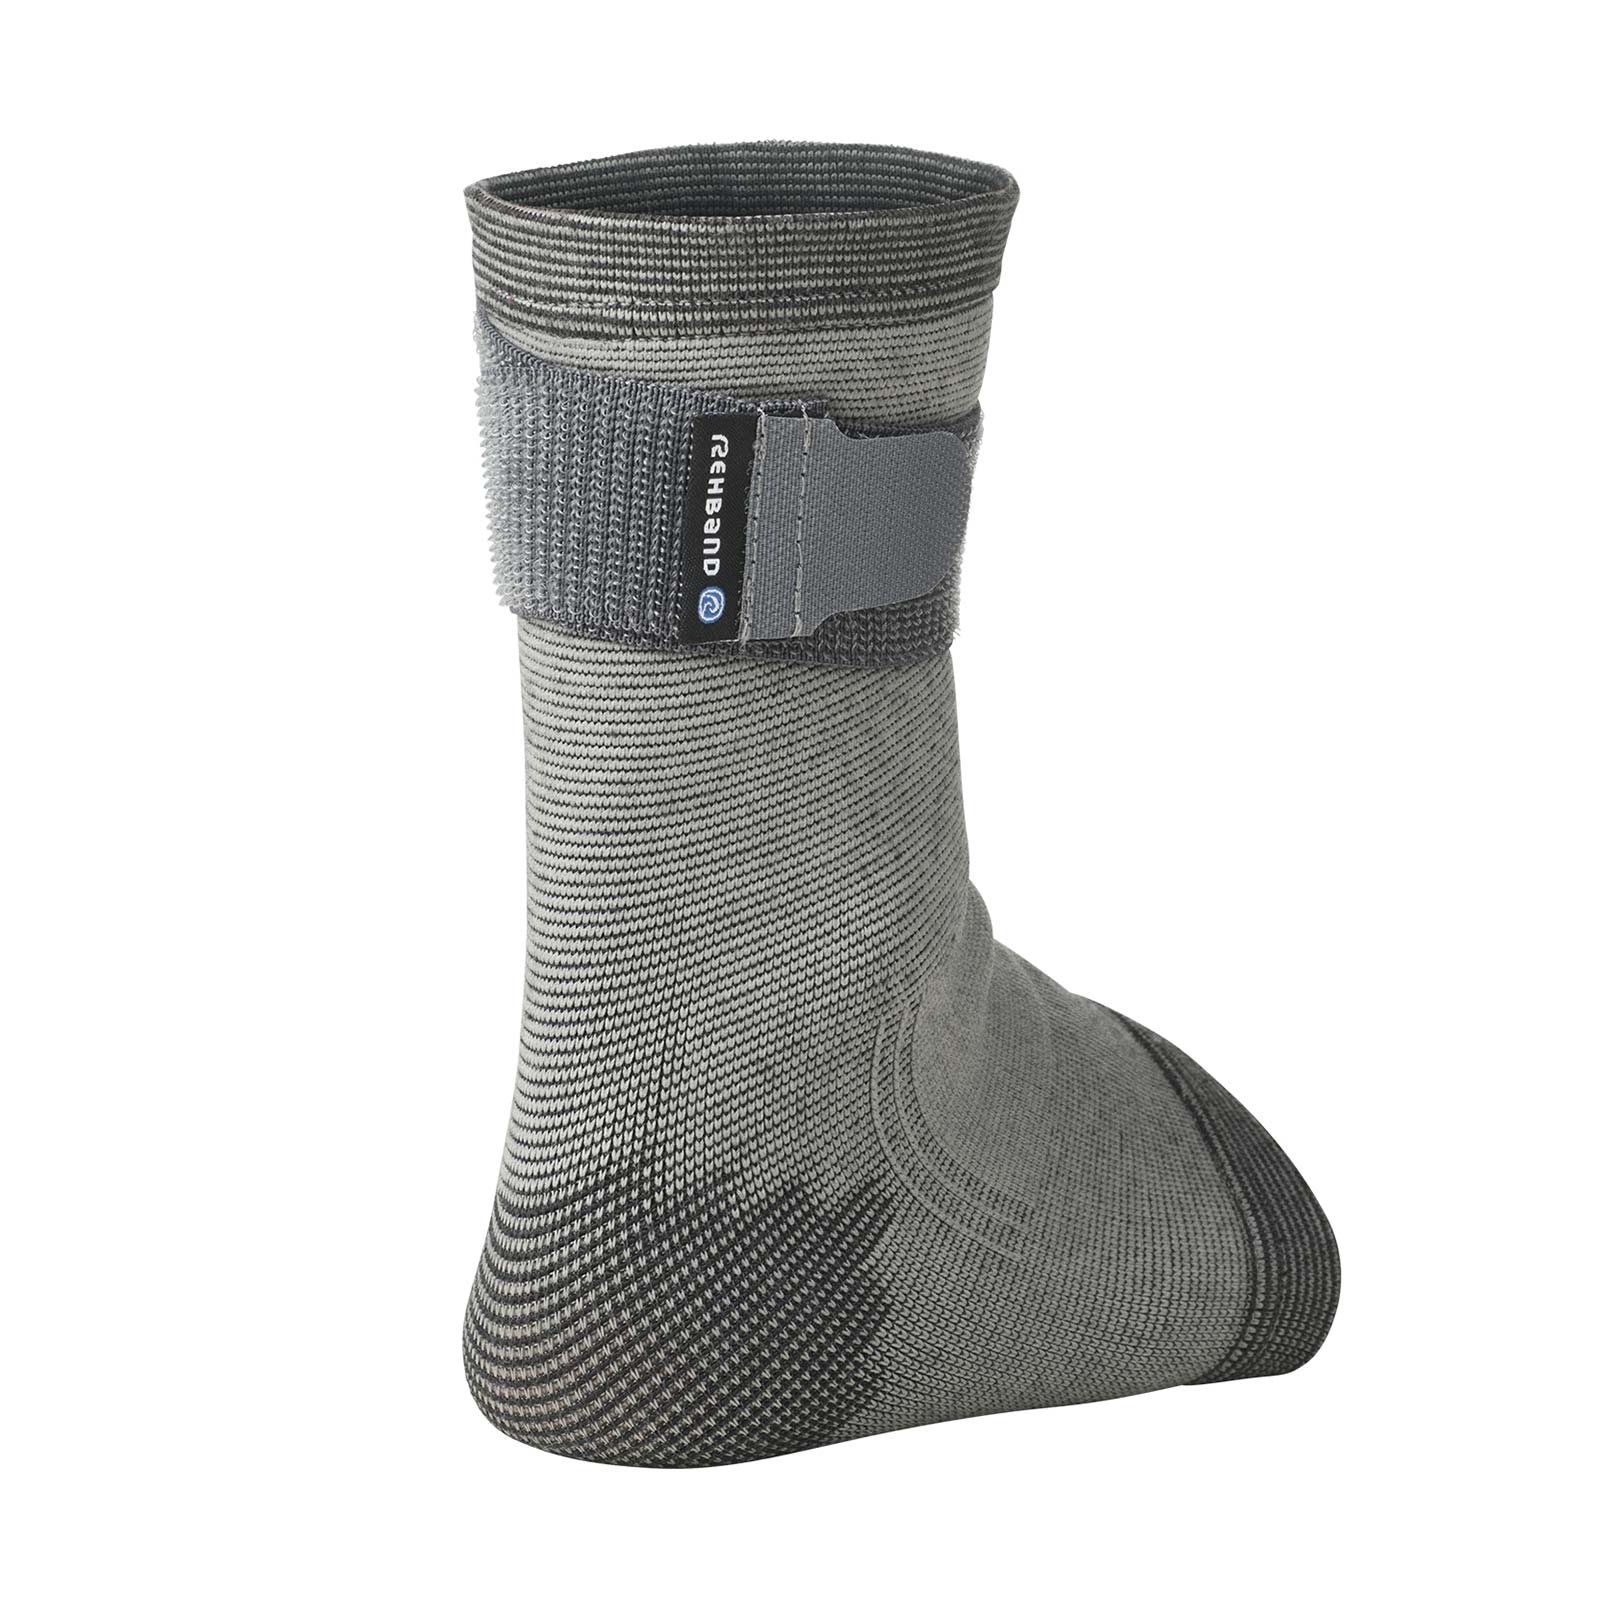 A grey knitted ankle sleeve with an adjuster at the top